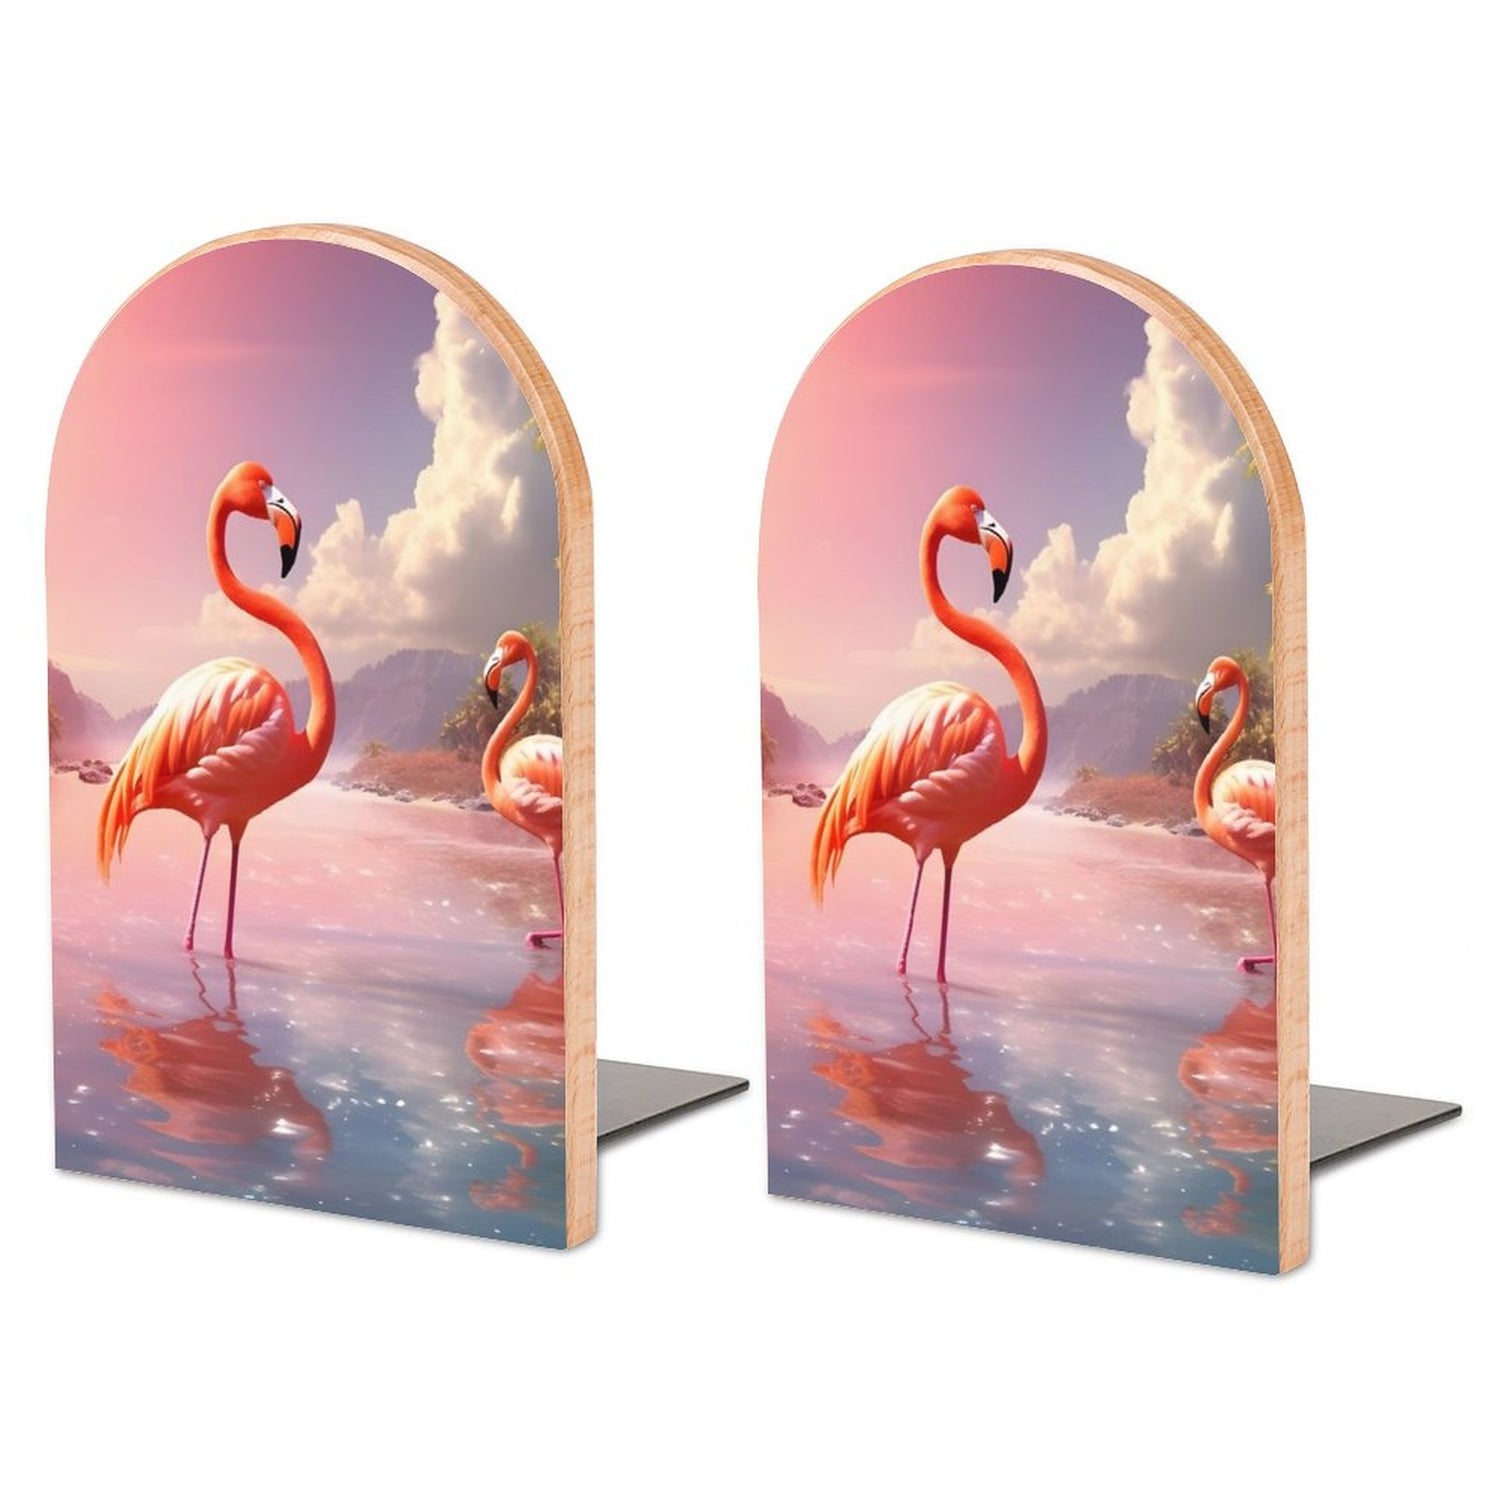 Bookends SolarLab_flamingos_tropical_sea_island_sunlight_fantasy_stock_i_4ce9691a-27a1-4390-8b29-492ab7bad5c9 Style-7 One Size normal-online-PERSONAL DESIGN